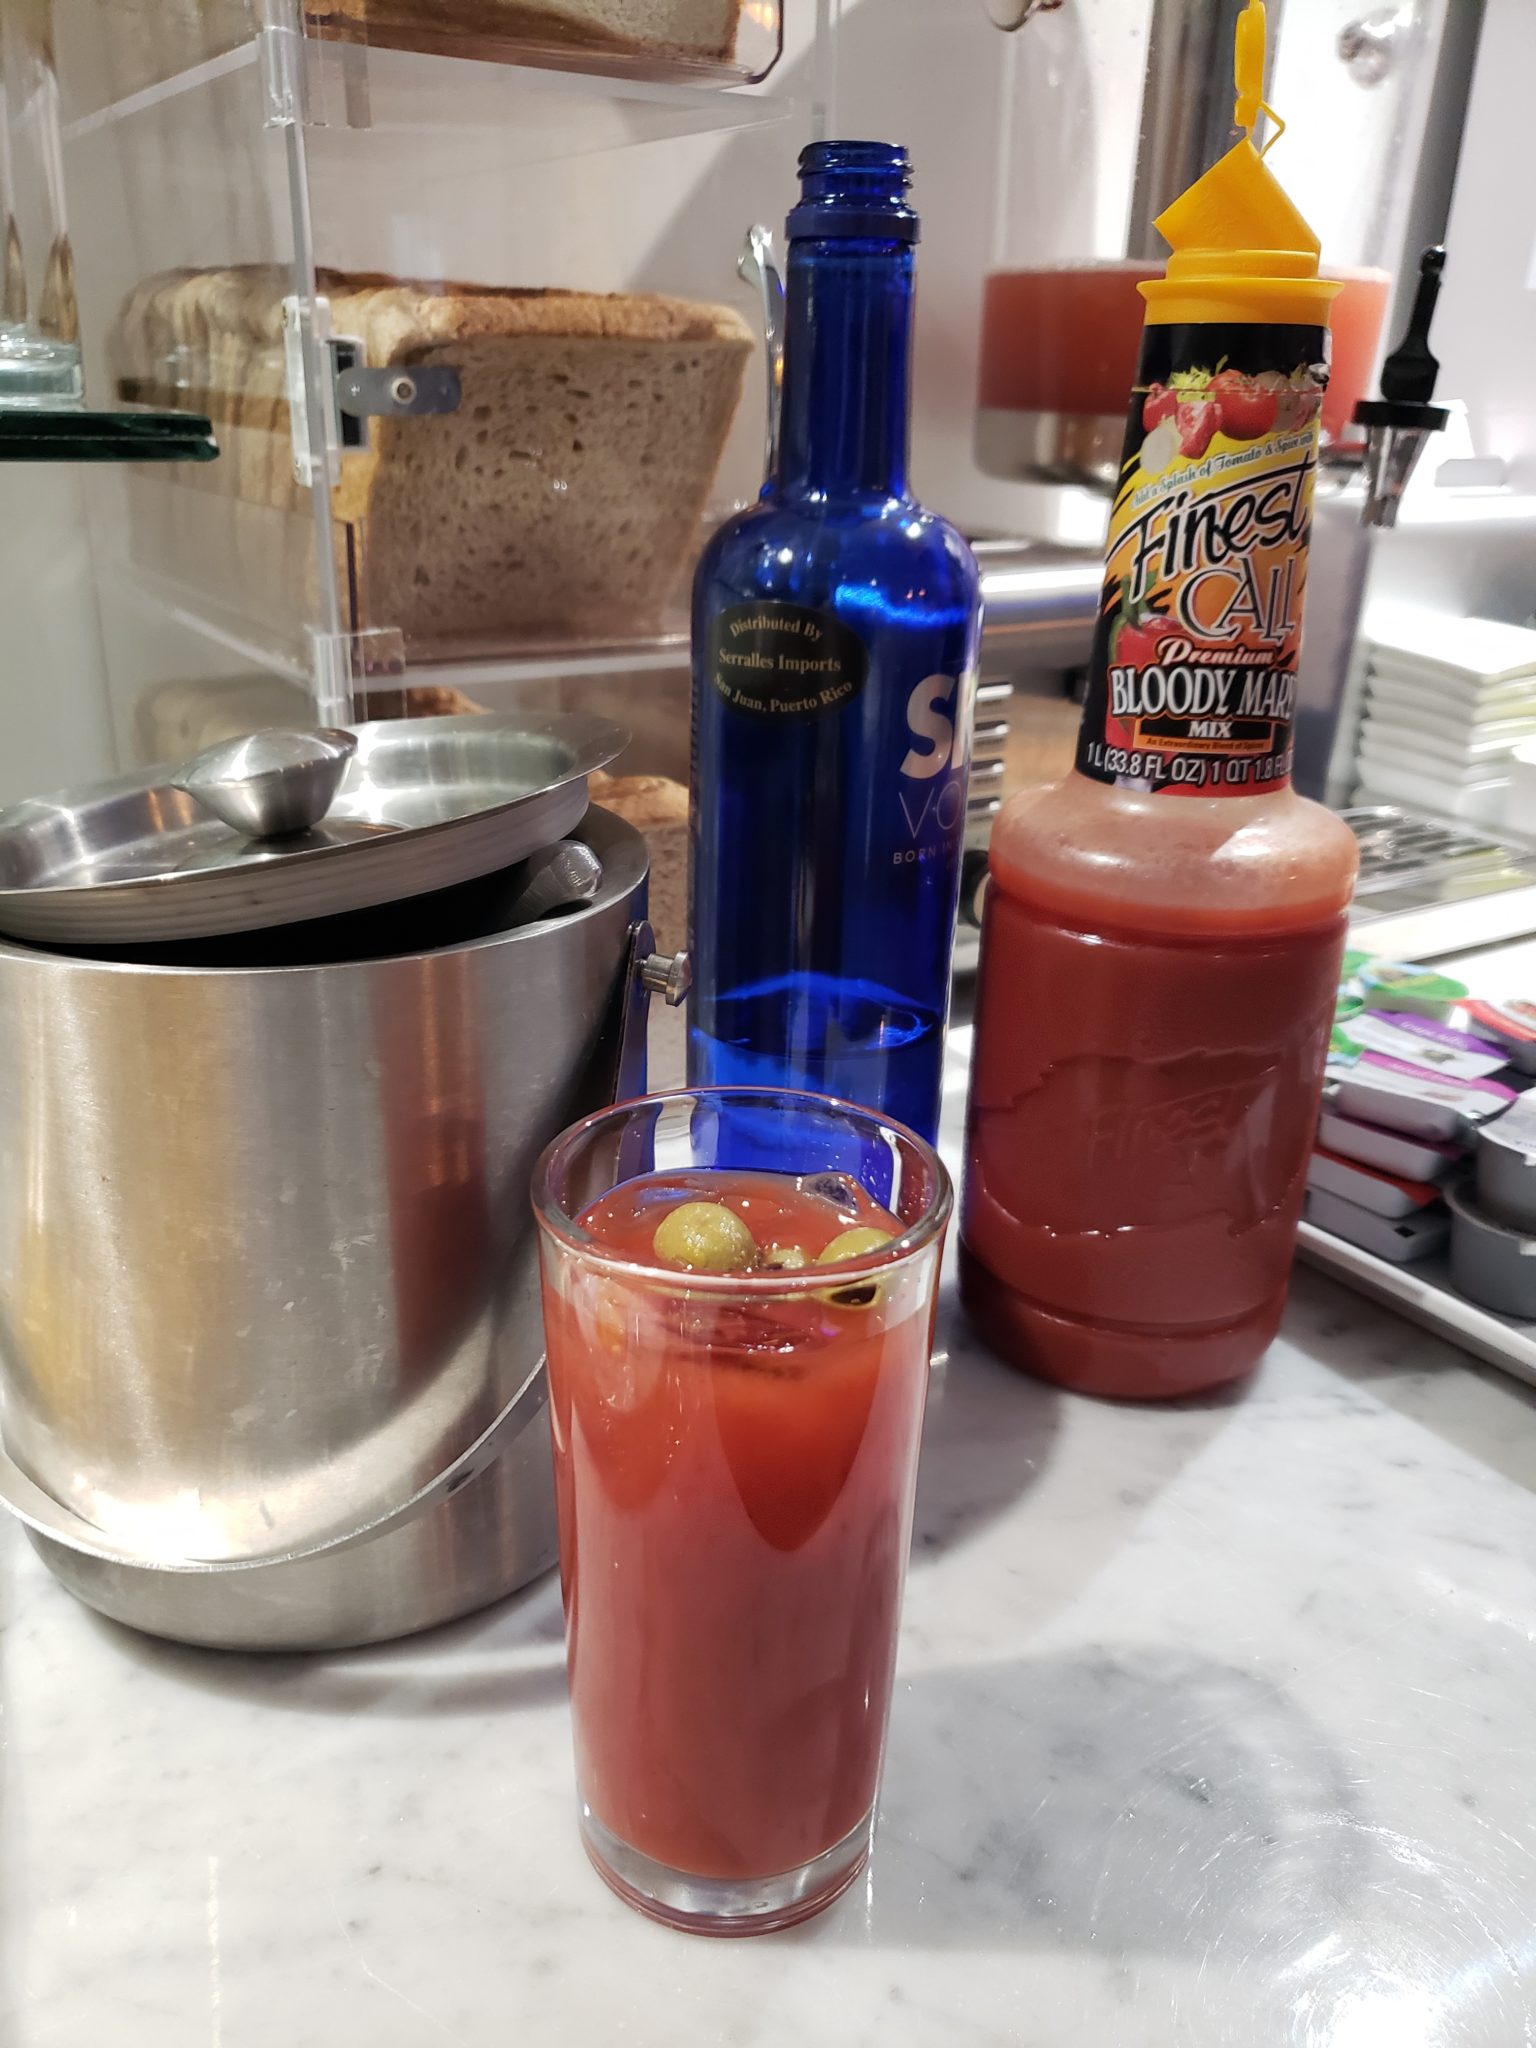 a glass of bloody mary and a blue bottle of liquid